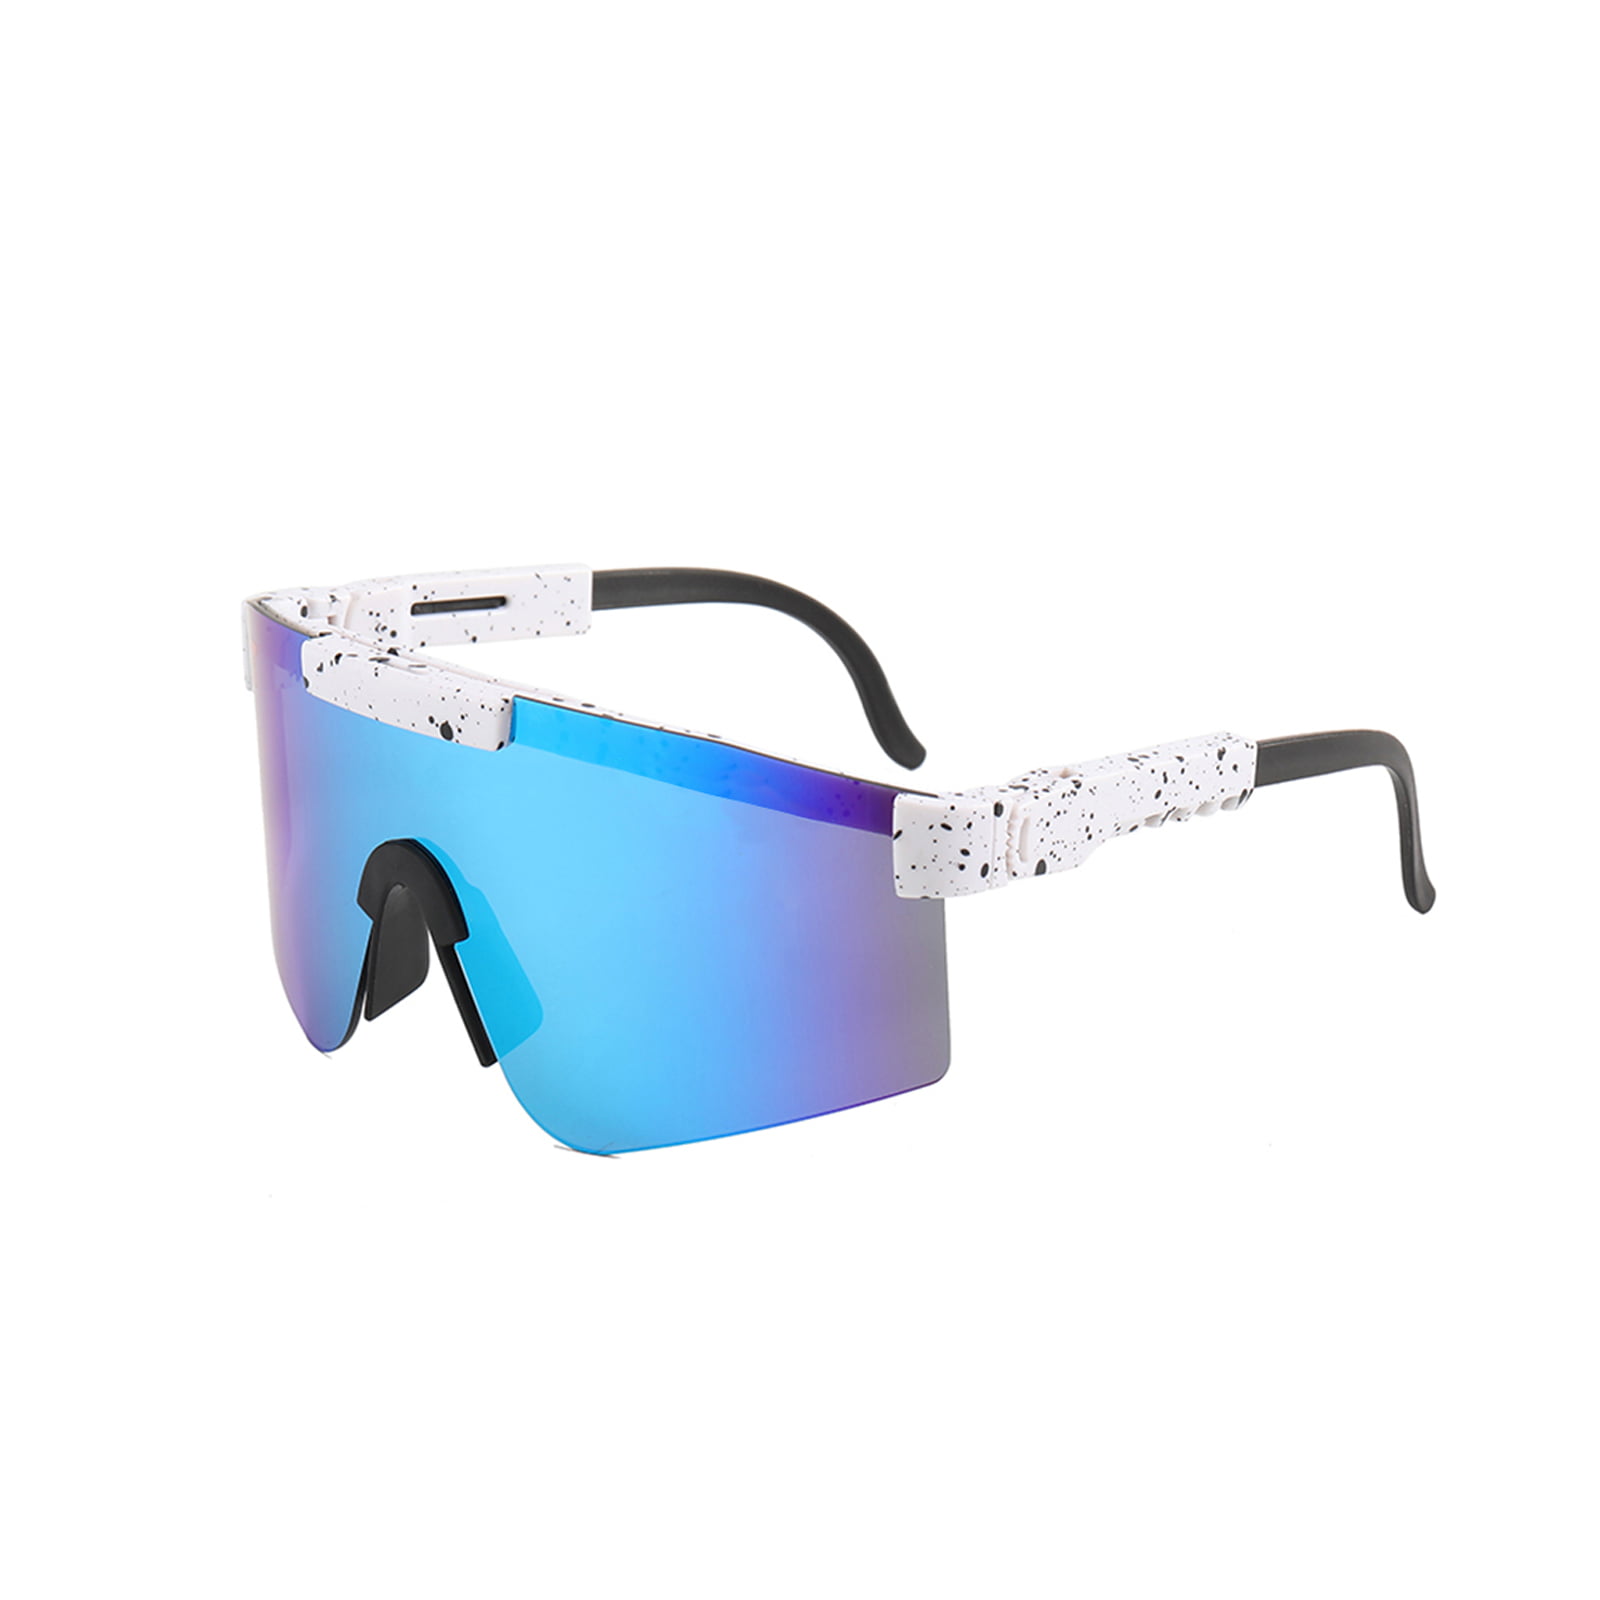 Pit Viper UV400 Cycling Polarized Sunglasses Outdoor Sport Eyeglasses Protect your eyes Suitable for adults C10 